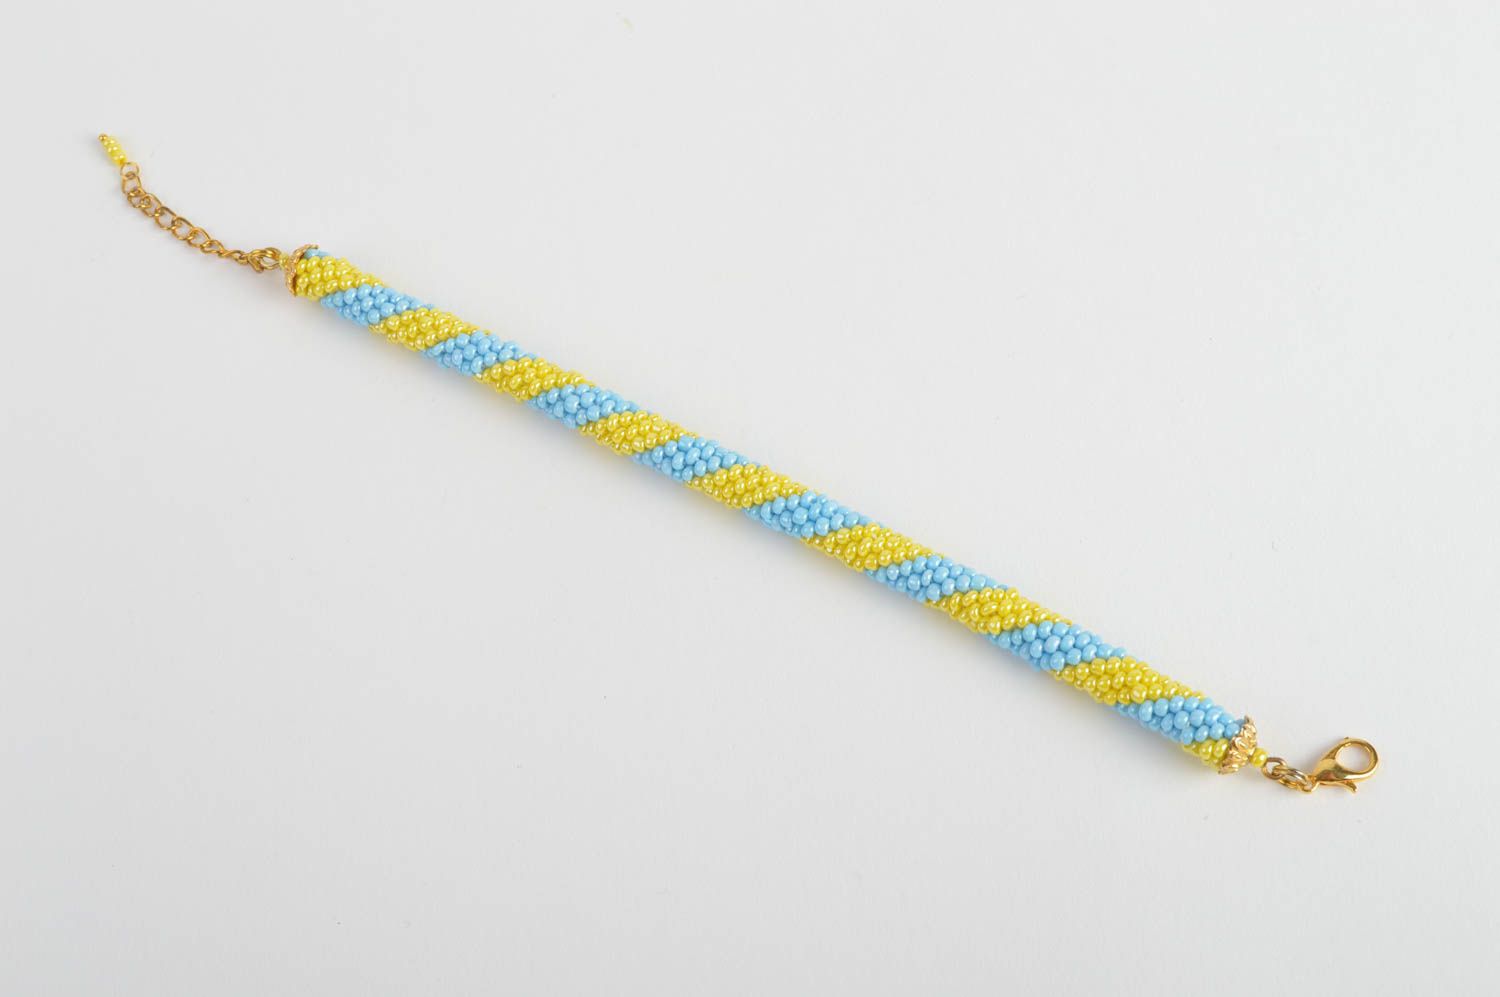 Handmade beaded cord wrist bracelet in blue and yellow colors for women photo 5